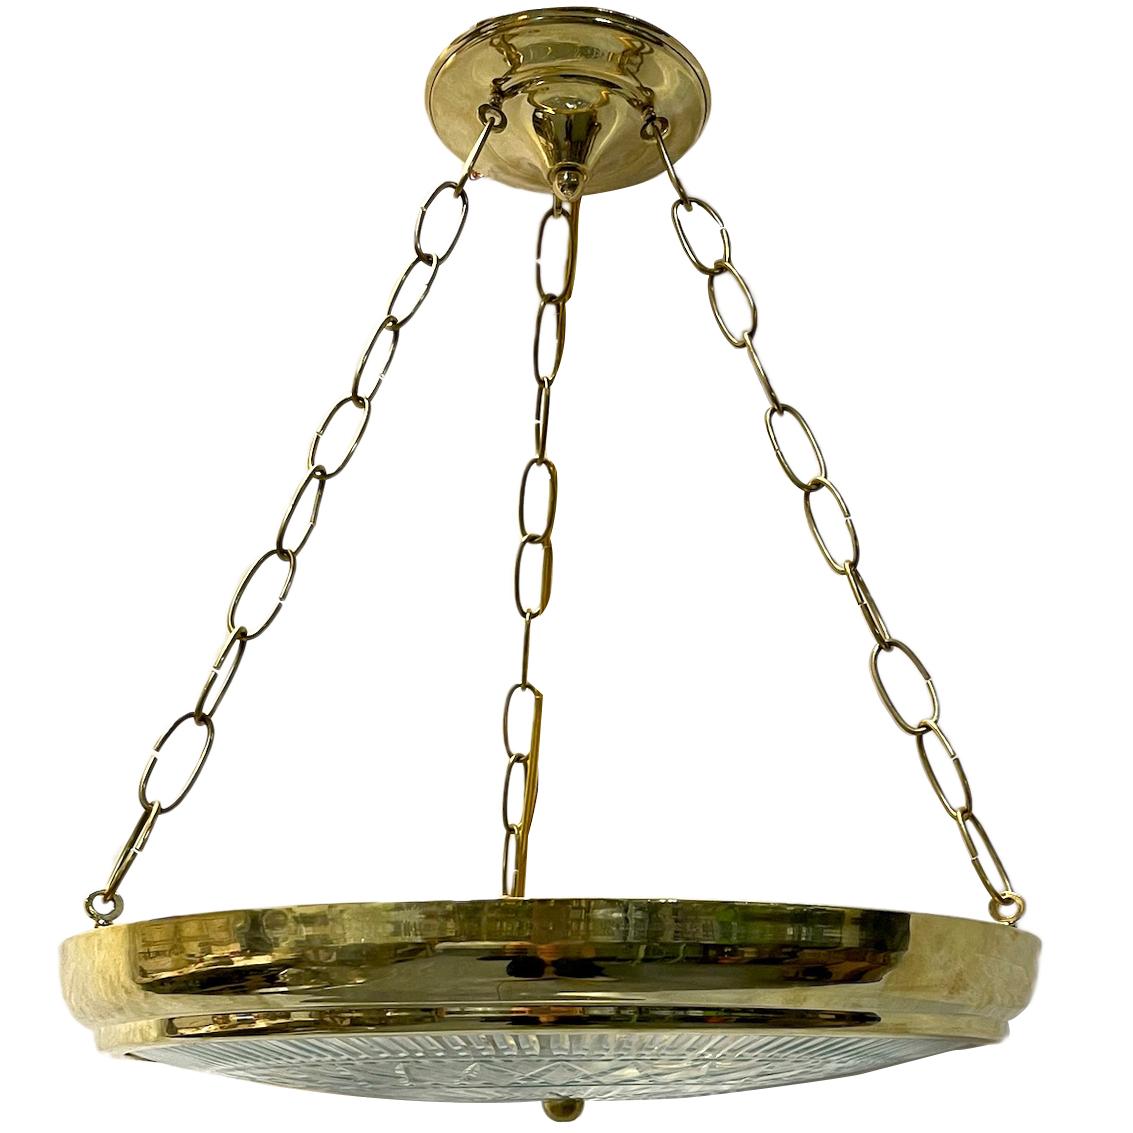 Set of six circa 1940s French gilt and bronze pendant light fixtures with cut crystal glass body. Sold individually.

Measurements:
Diameter: 17.25